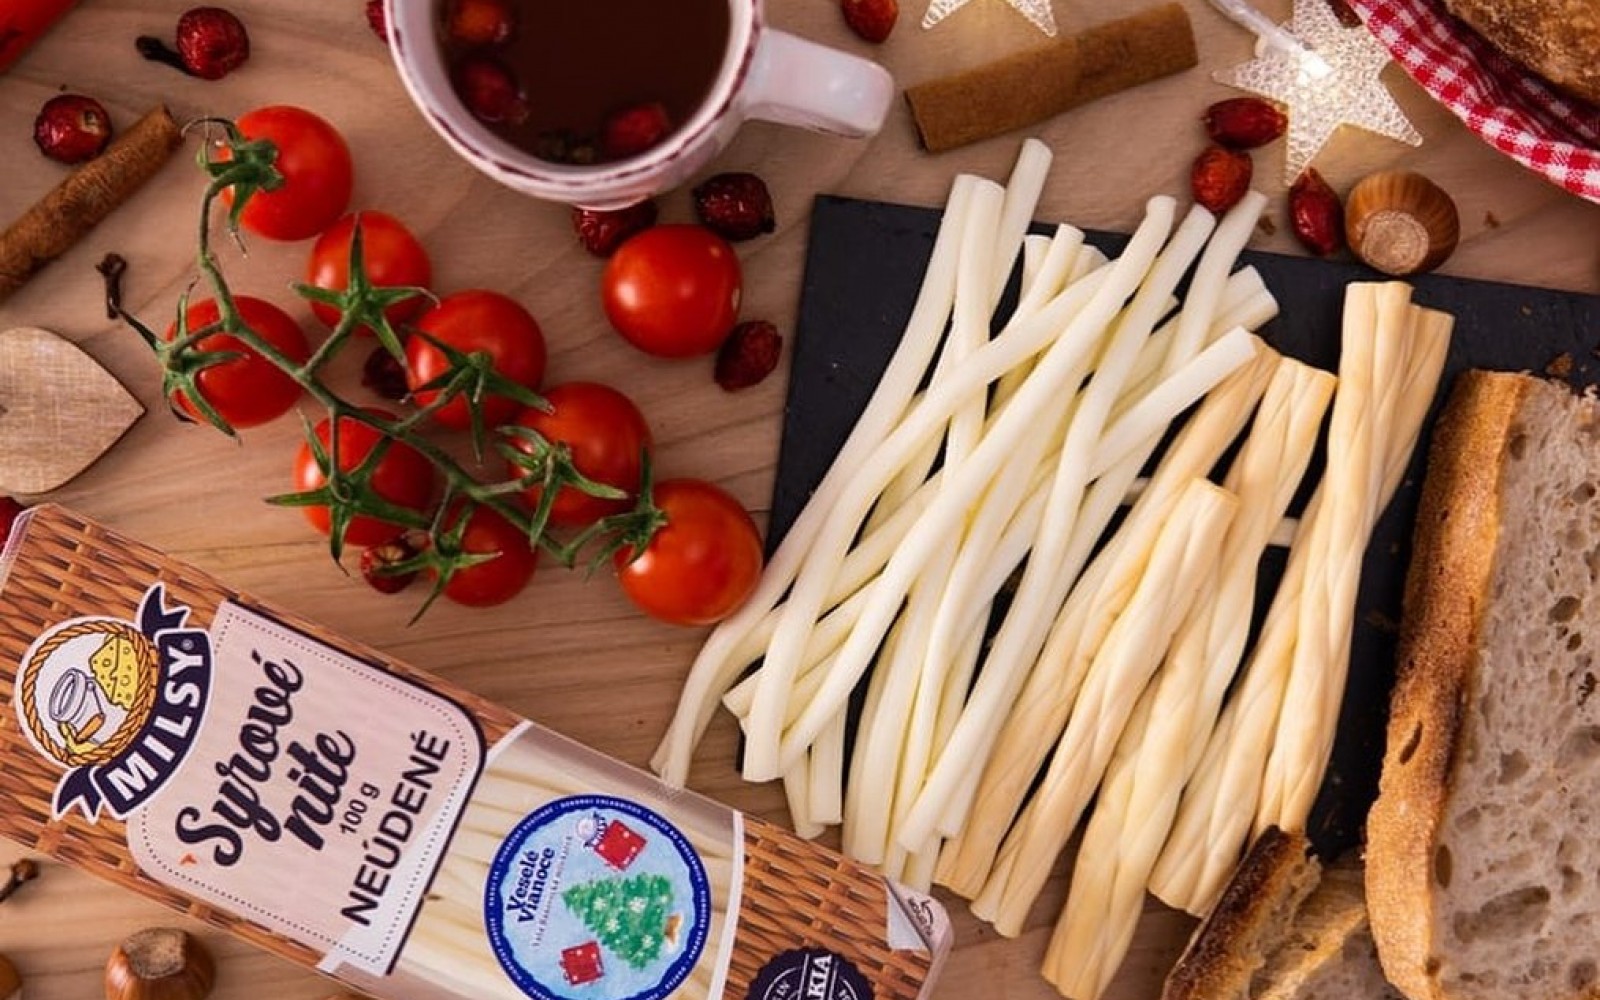 Milsy smoked string cheese has a characteristic taste, which is given to it by the smoked process.